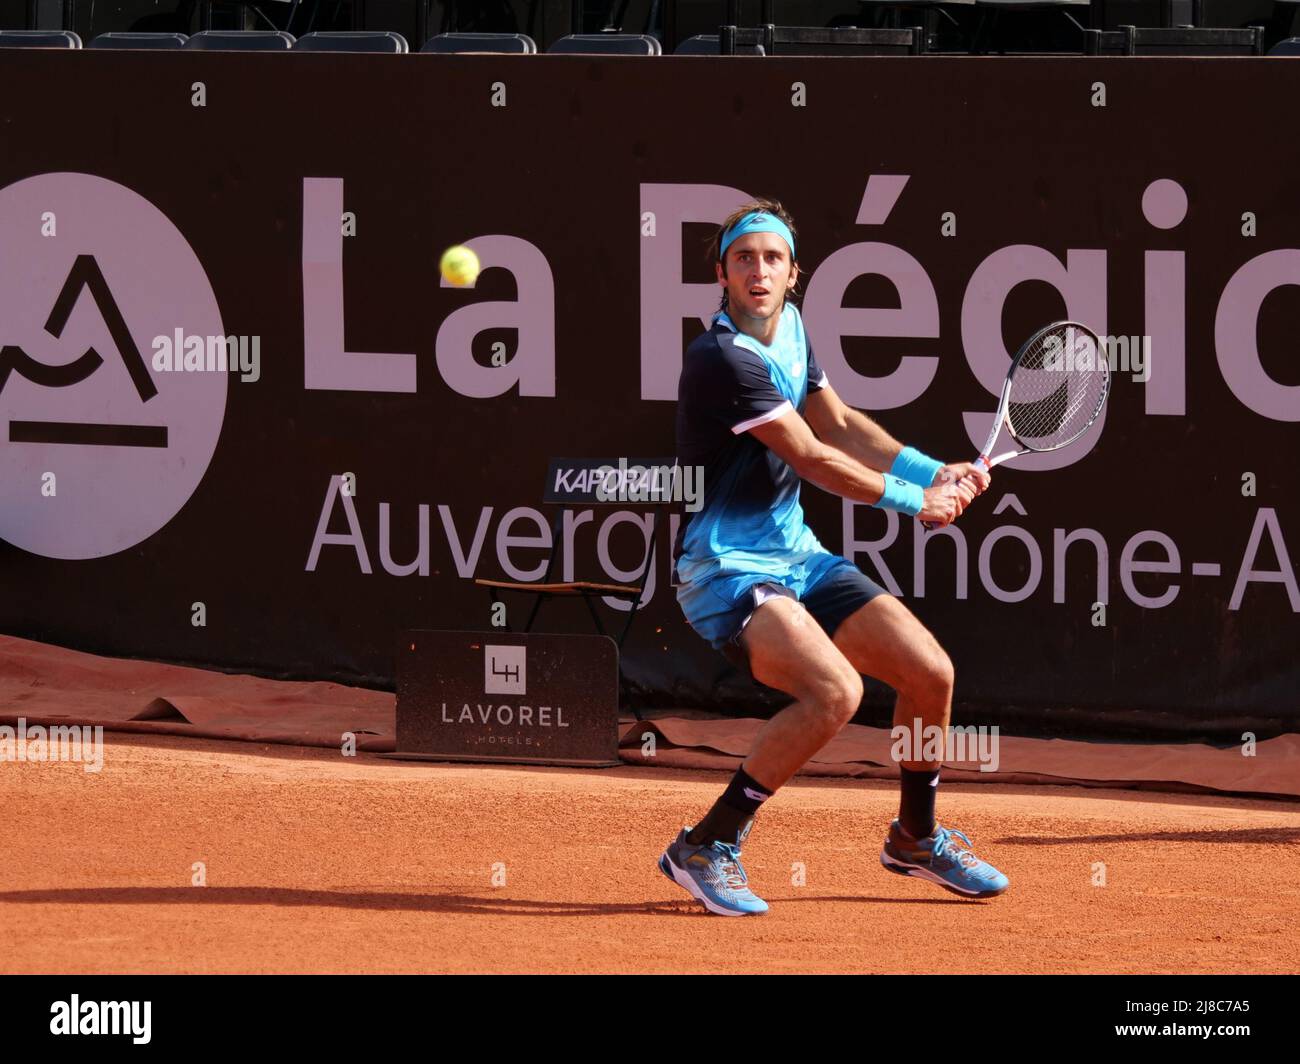 May 14, 2022, Lyon, France: Tomas Martin Etcheverry (ARG) against Mayeul  Darras (FRA) during the qualifying rounds at the Open Parc  Auvergne-Rhone-Alpes Lyon 2022, ATP 250 Tennis tournament on May 14, 2022